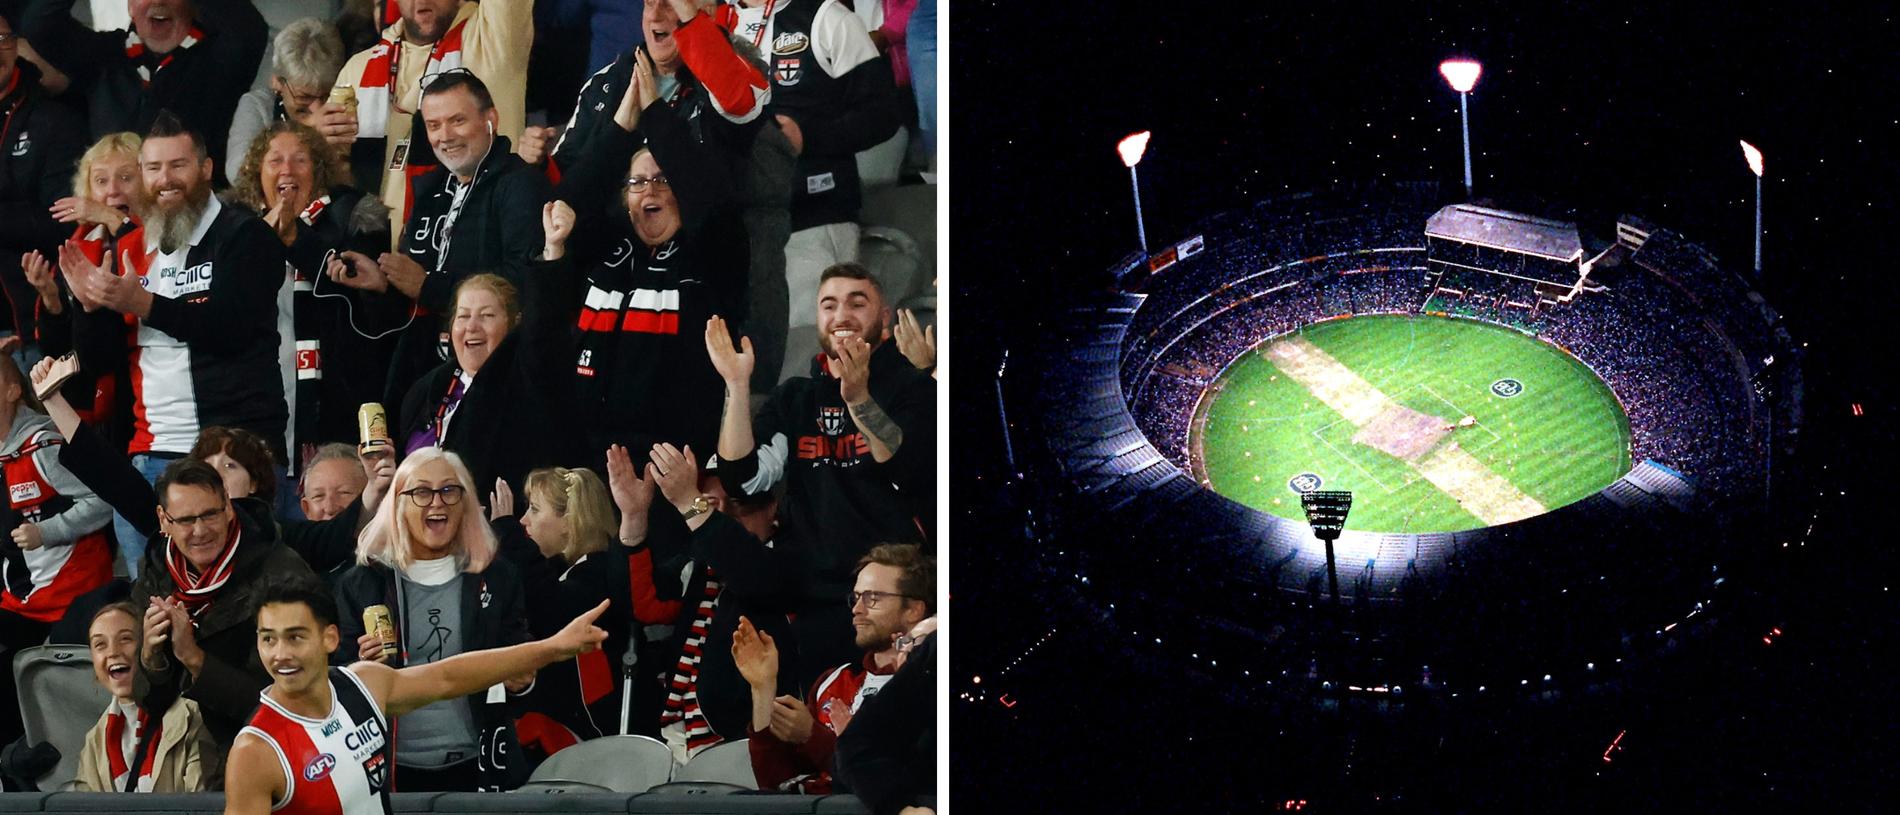 St Kilda is in discussions with the AFL to shift several home games to the MCG in hopes of eventually having a shared tendency setup with Marvel Stadium similar to Essendon and Carlton, reports The Age.